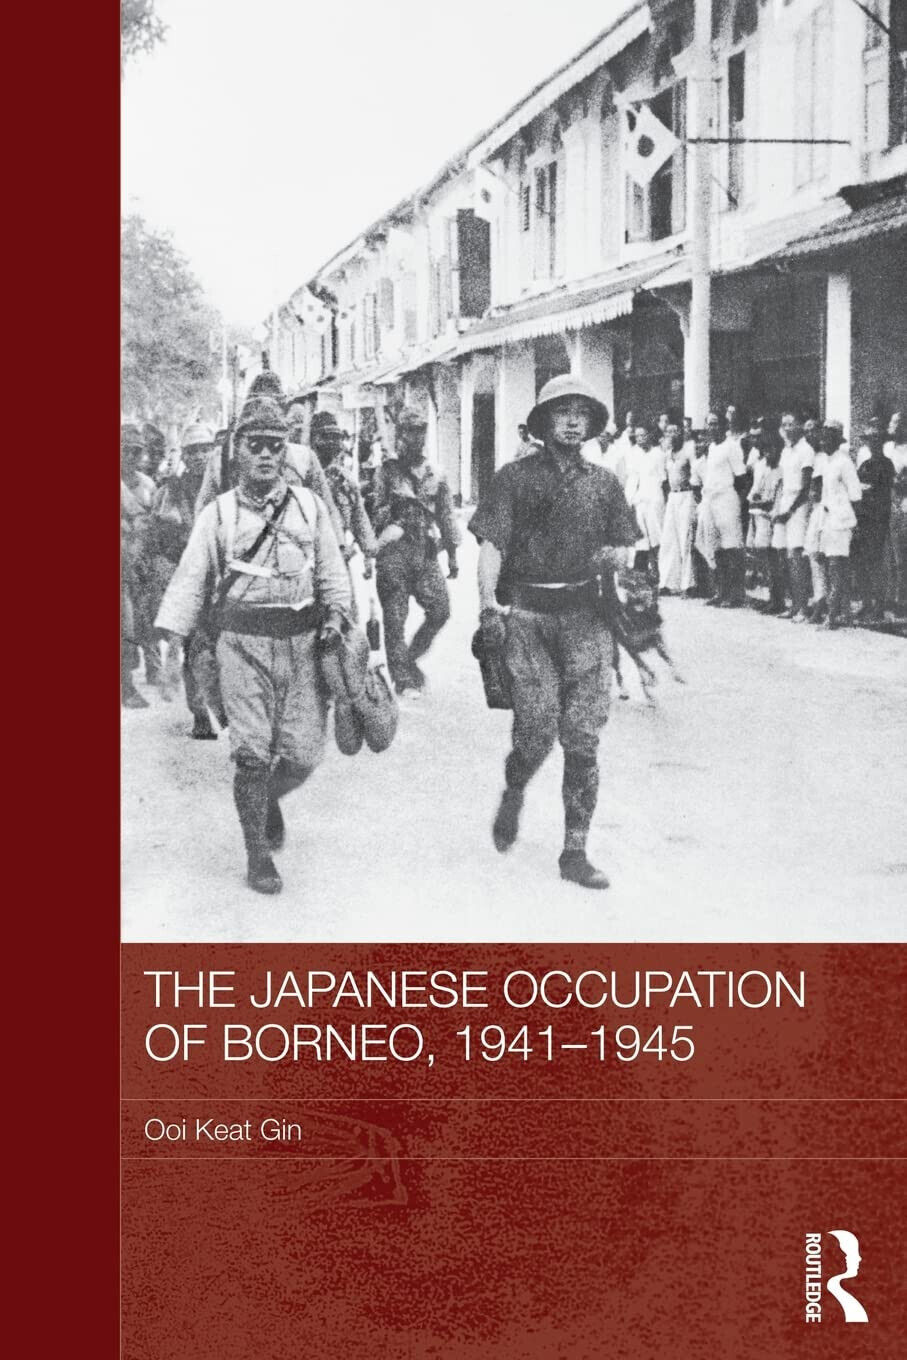 The Japanese Occupation Of Borneo, 1941-45 - Ooi Keat Gin - Routledge, 2013